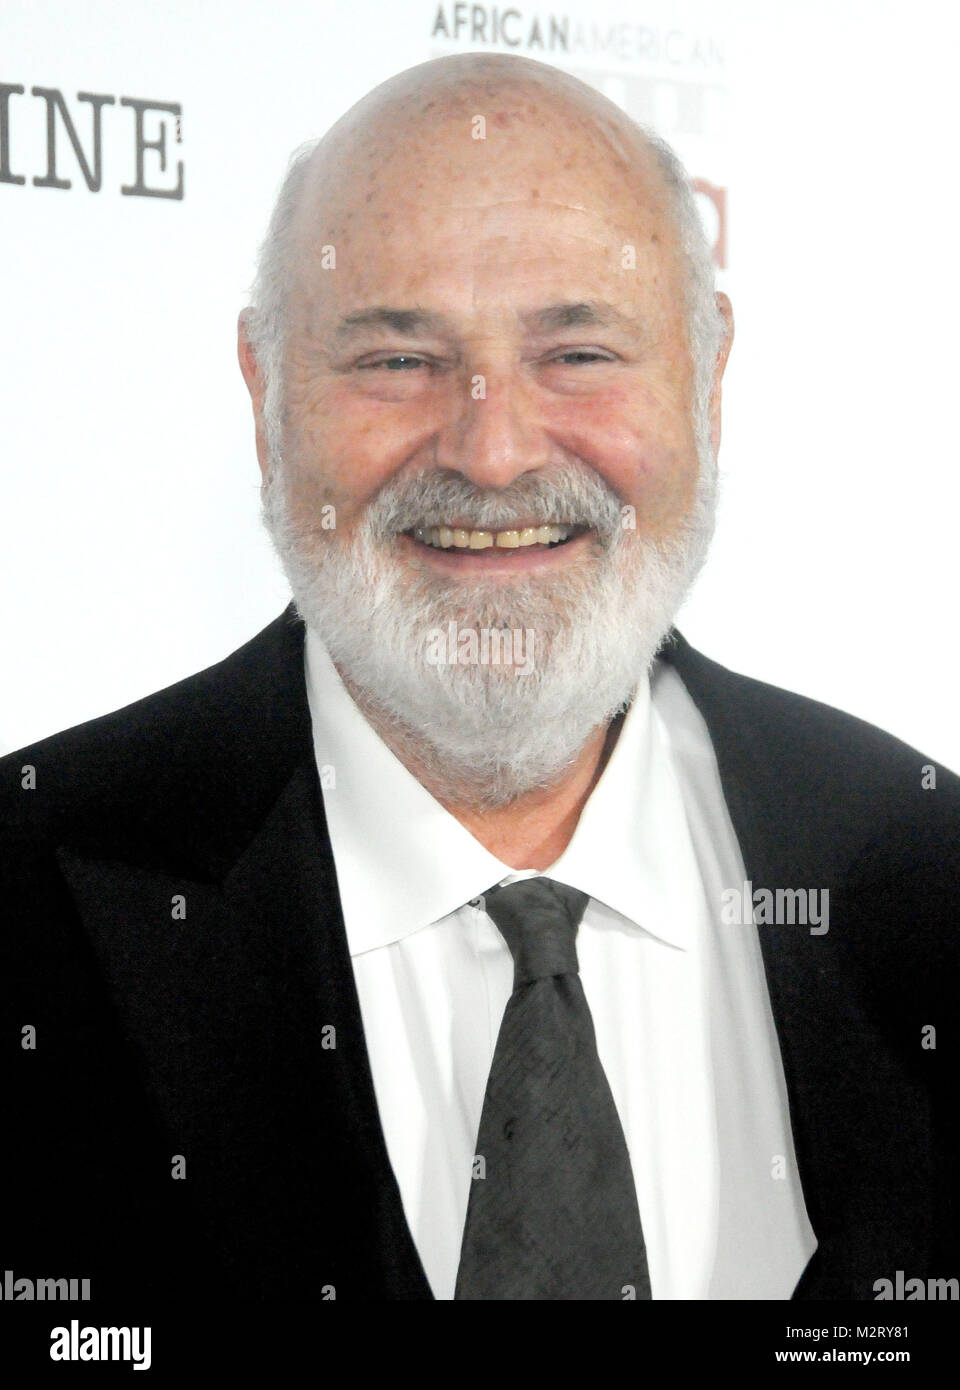 Los Angeles, California, USA. 7th February, 2018. Director Rob Reiner attends the 9th Annual African American Film Critics Assocation Awards at Taglyan Cultural Complex on February 7, 2018 in Los Angeles, California. Photo by Barry King/Alamy Live News Stock Photo